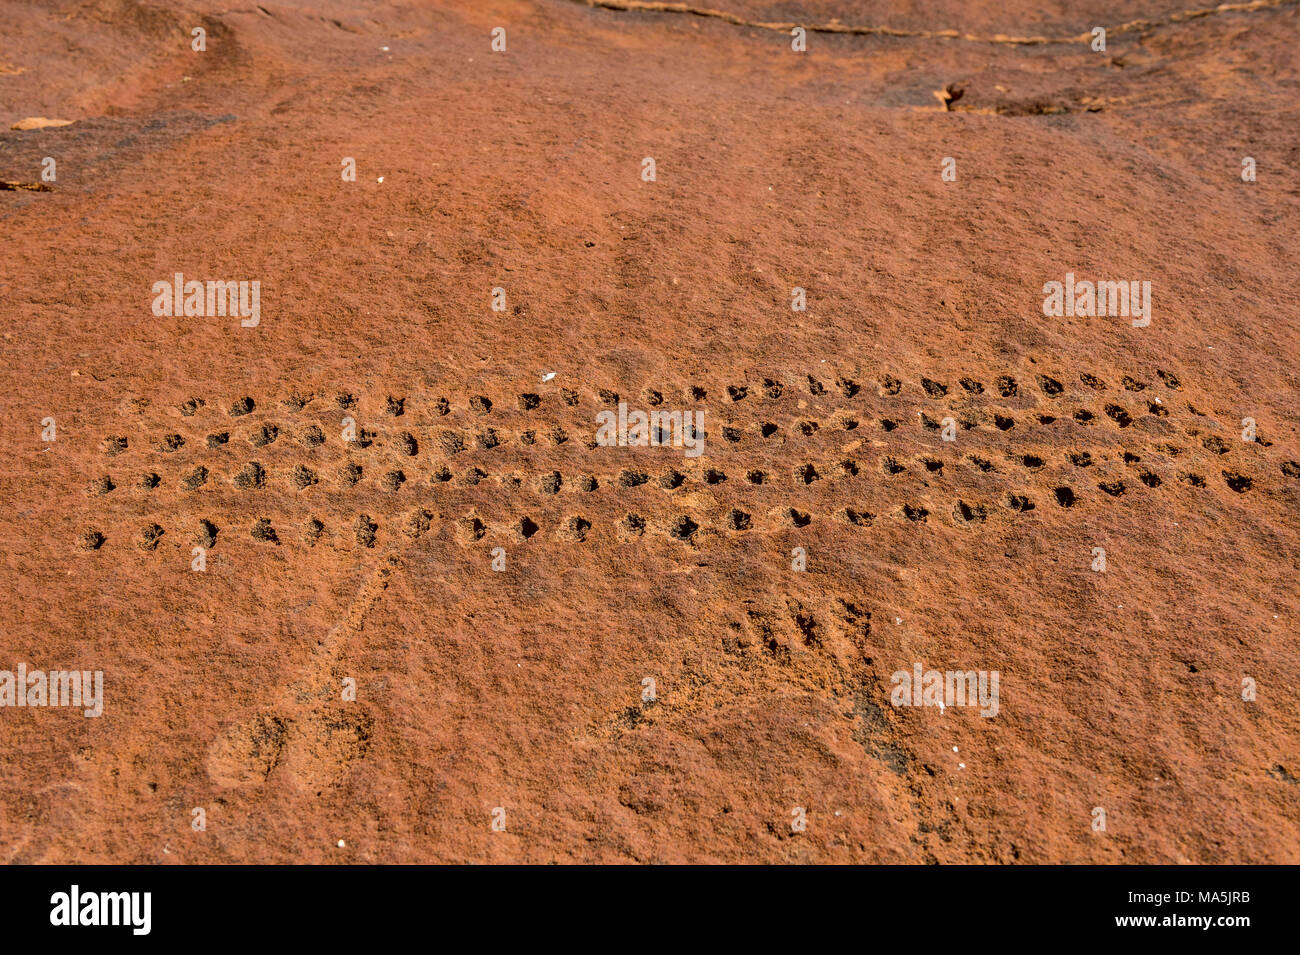 Gravures rupestres, Unesco world heritage sight, Twyfelfontein, Namibie Banque D'Images